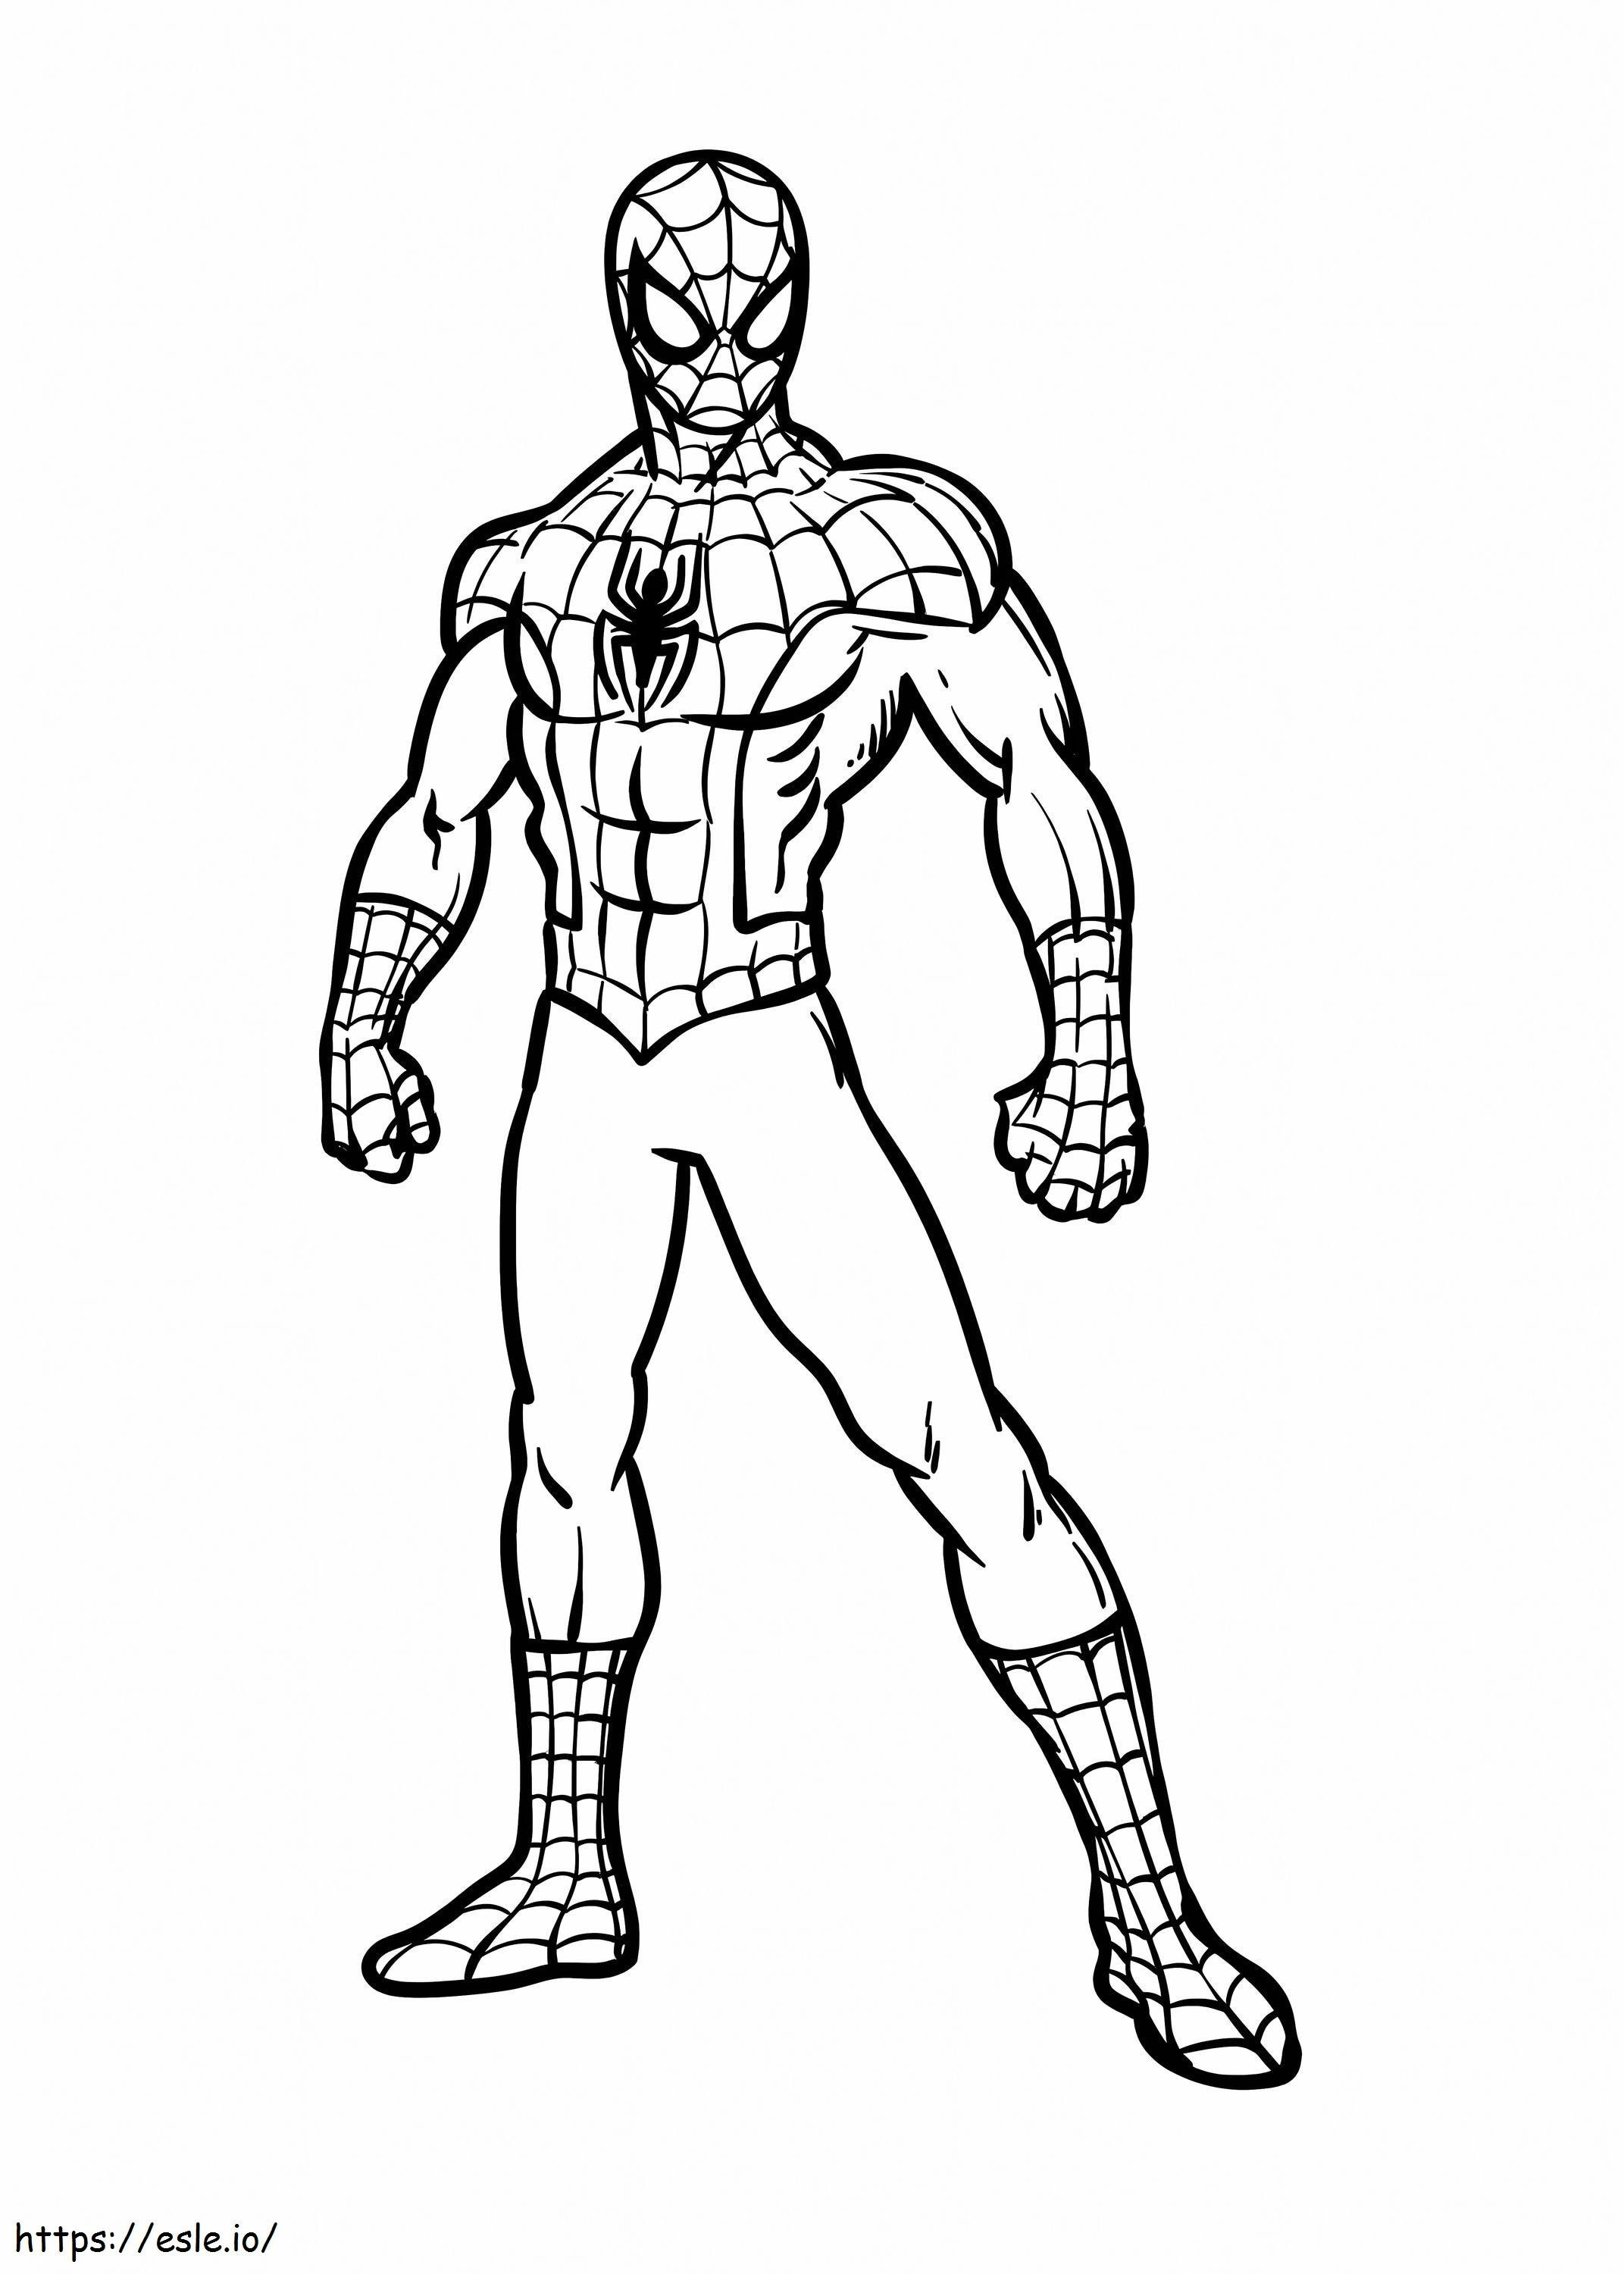 Basic Spider Man coloring page